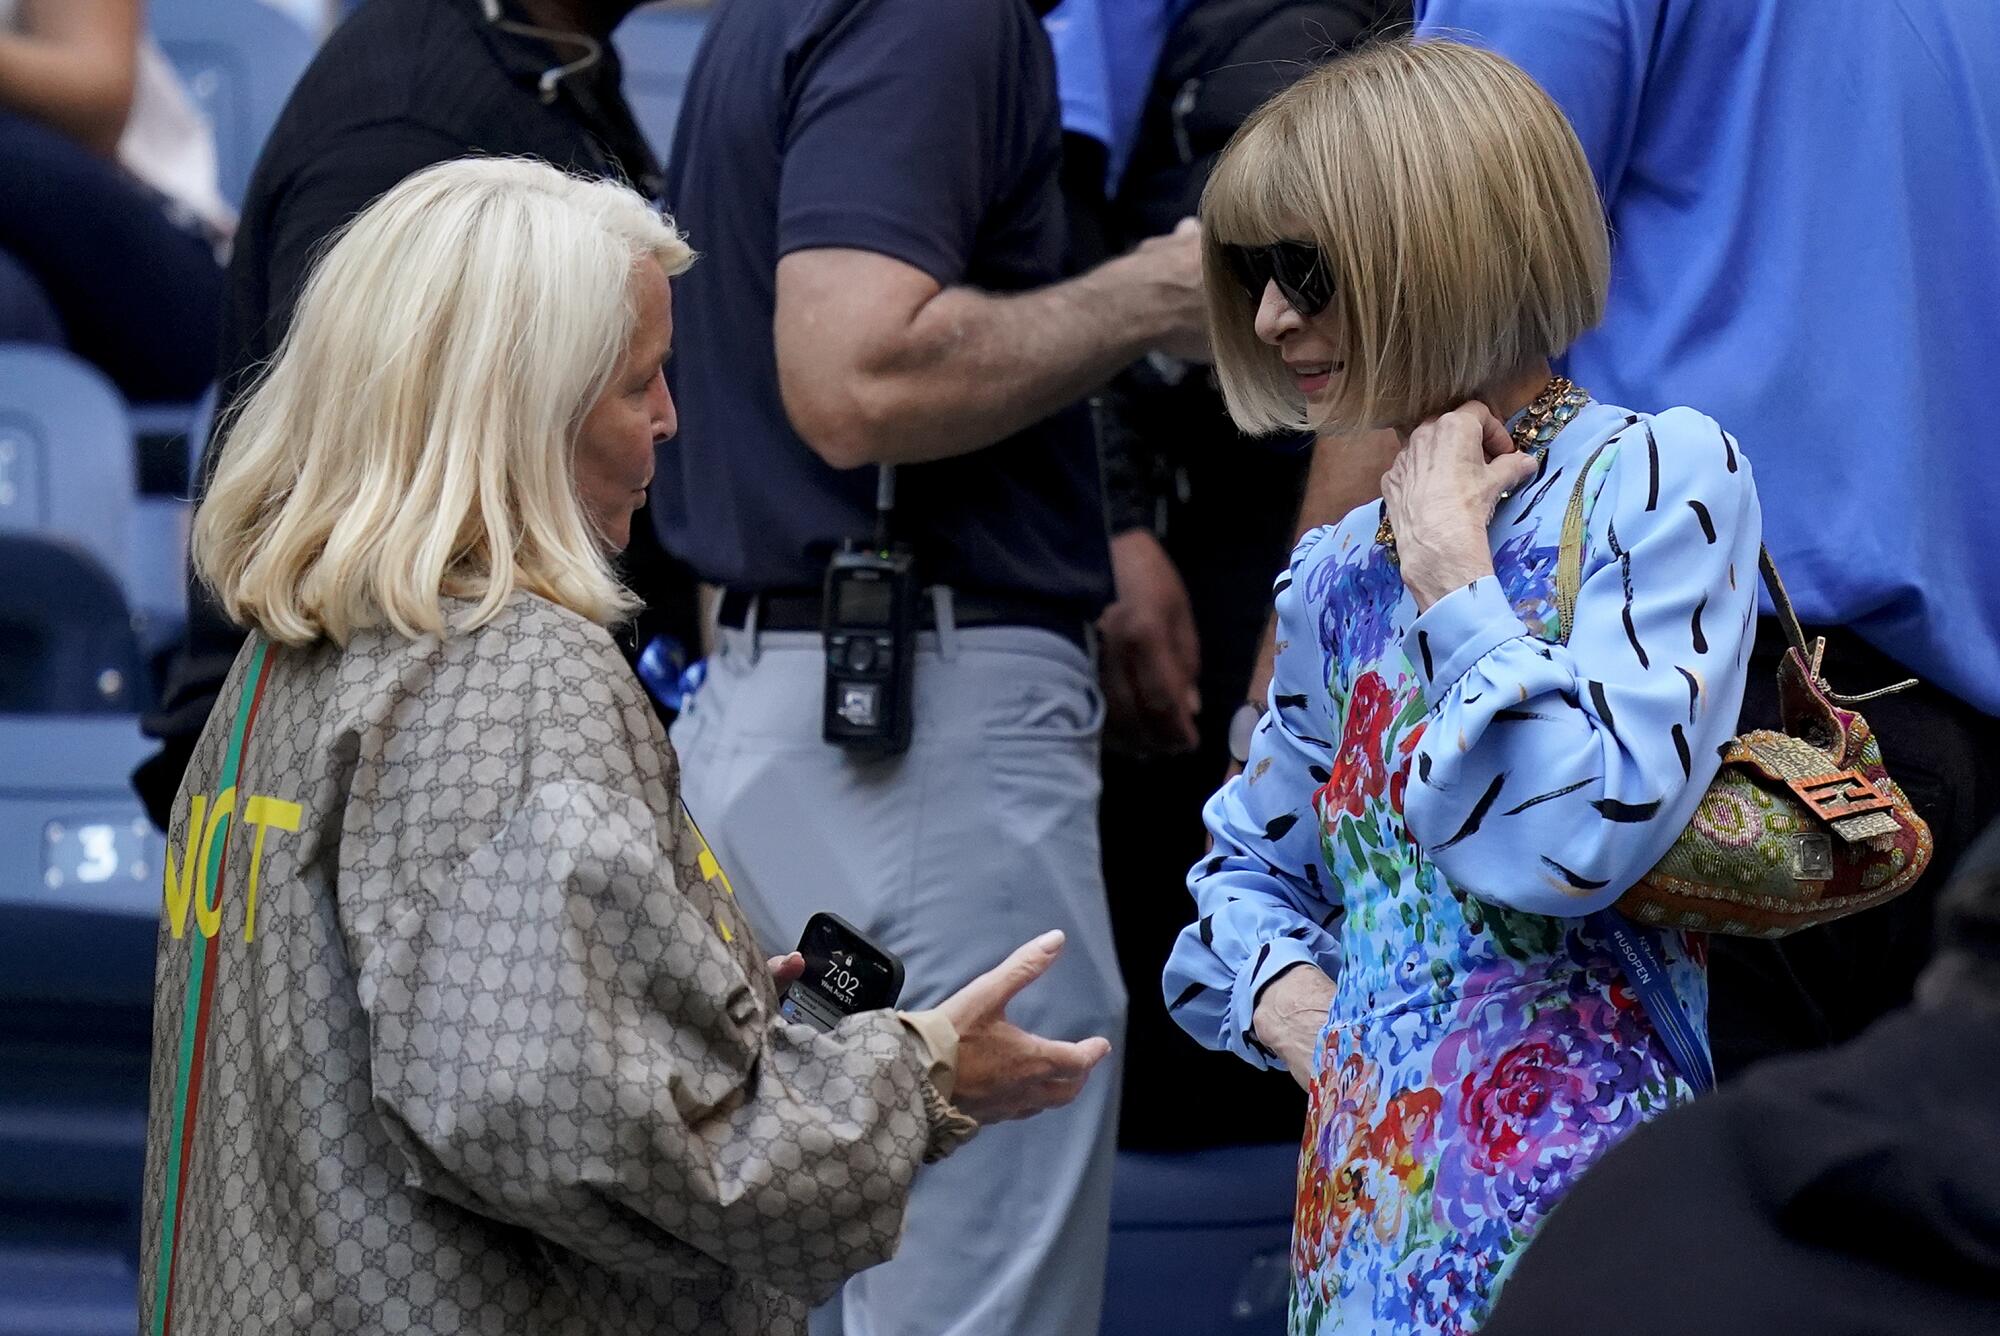 Anna Wintour before watching play between Serena Williams and Anett Kontaveit.